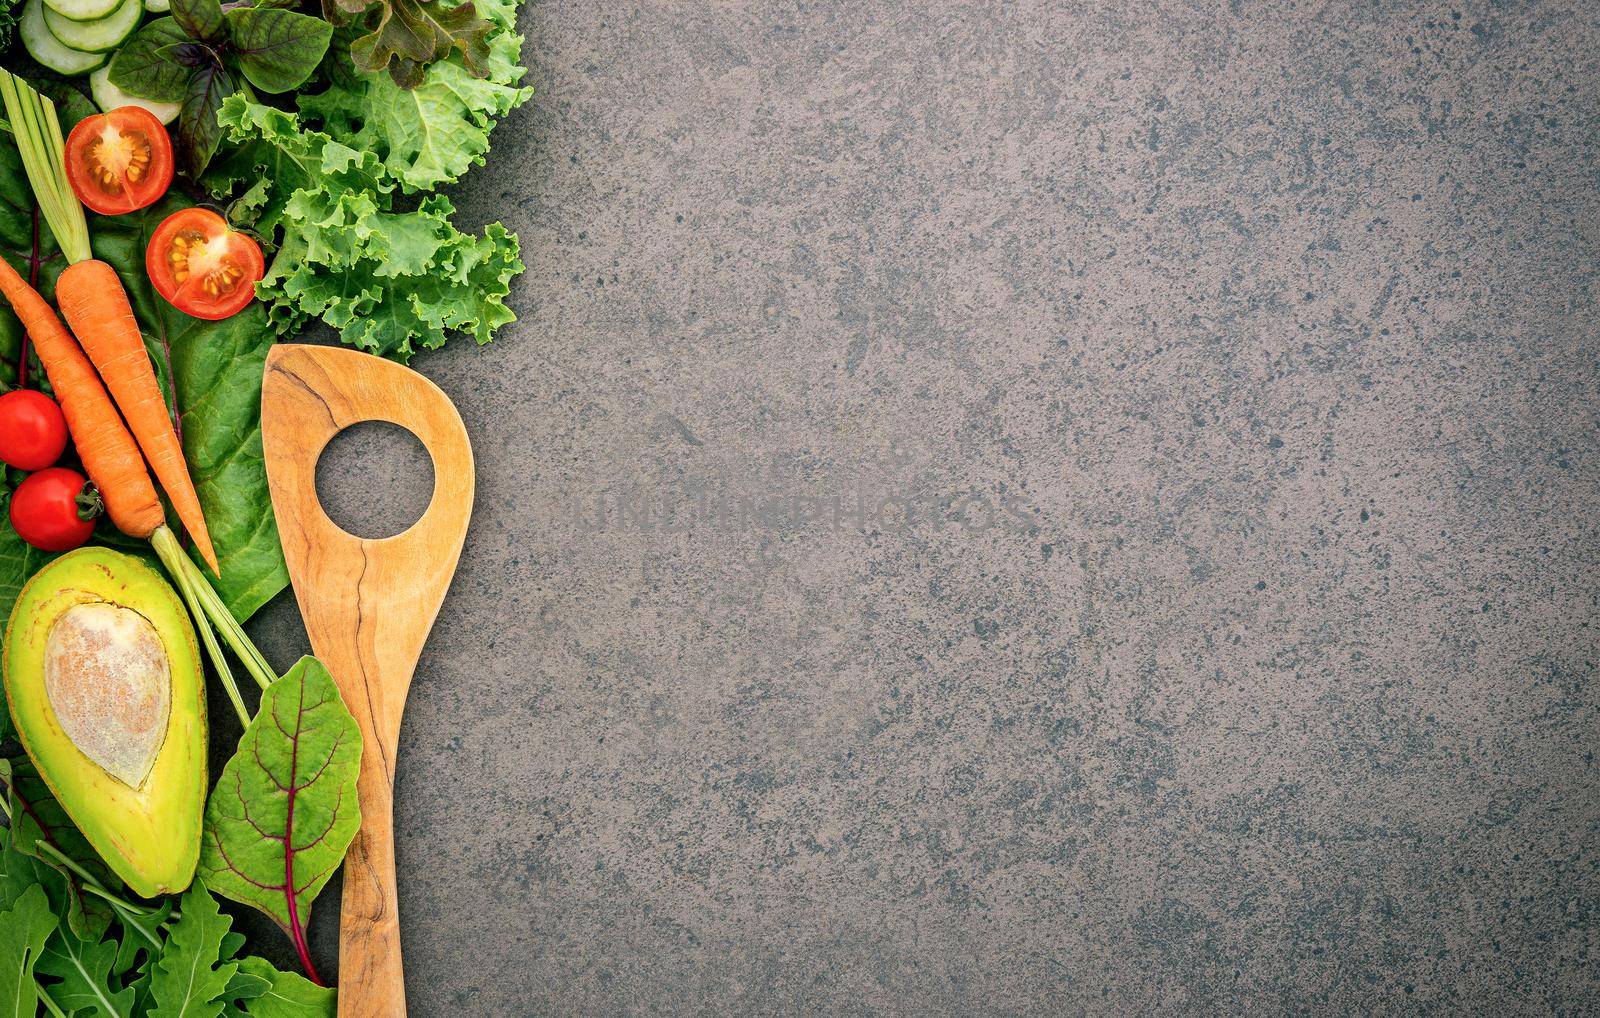 Healthy food and cooking concept wooden spatula and vegetables on dark stone background.